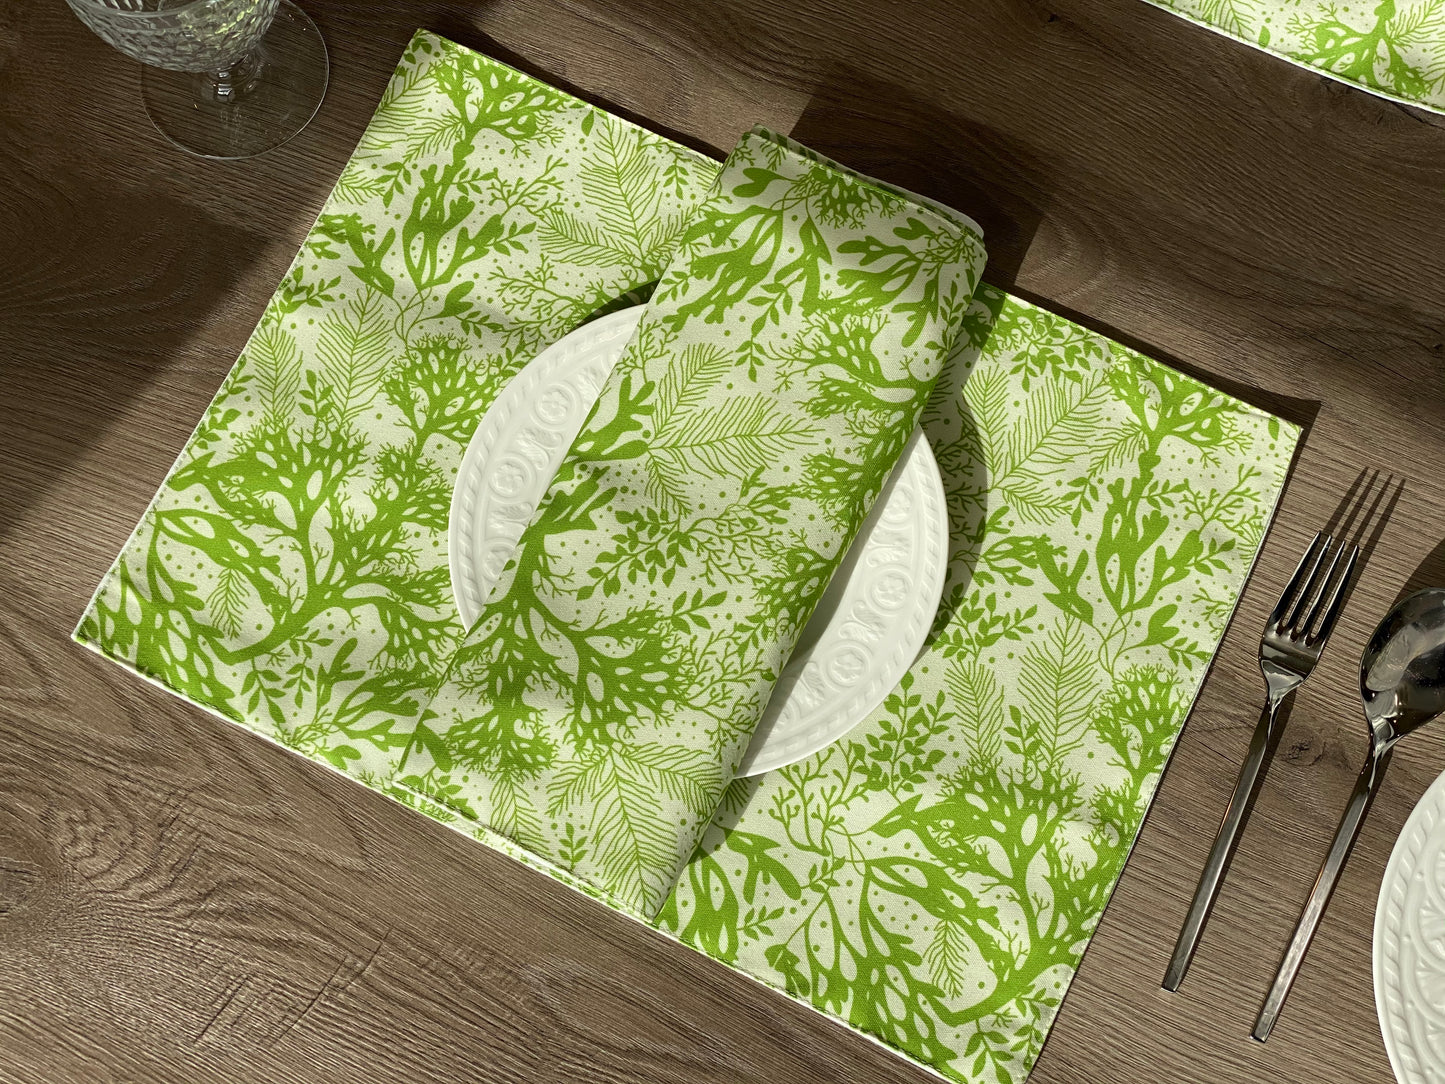 Set of 4 Summer Plants Placemat, Green Branches and Leaves Pattern, Machine washable Cotton Placemat